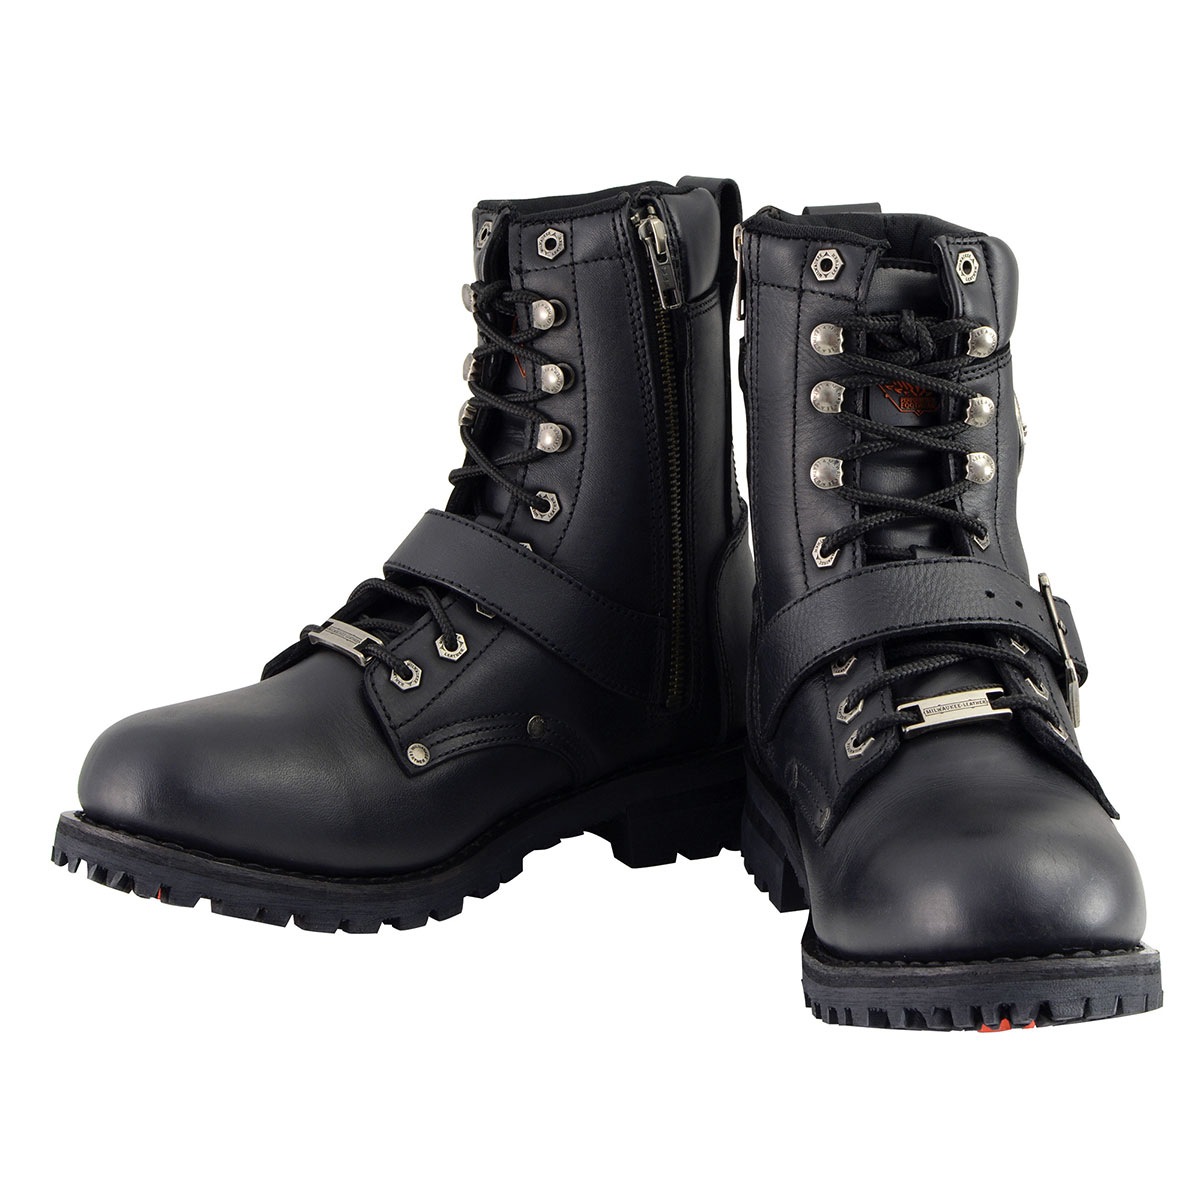 Milwaukee Leather MBM101 Men's Black Leather Lace-Up Engineer Motorcycle Boots w/ Buckles and Side Zipper Entry 8 - image 3 of 12